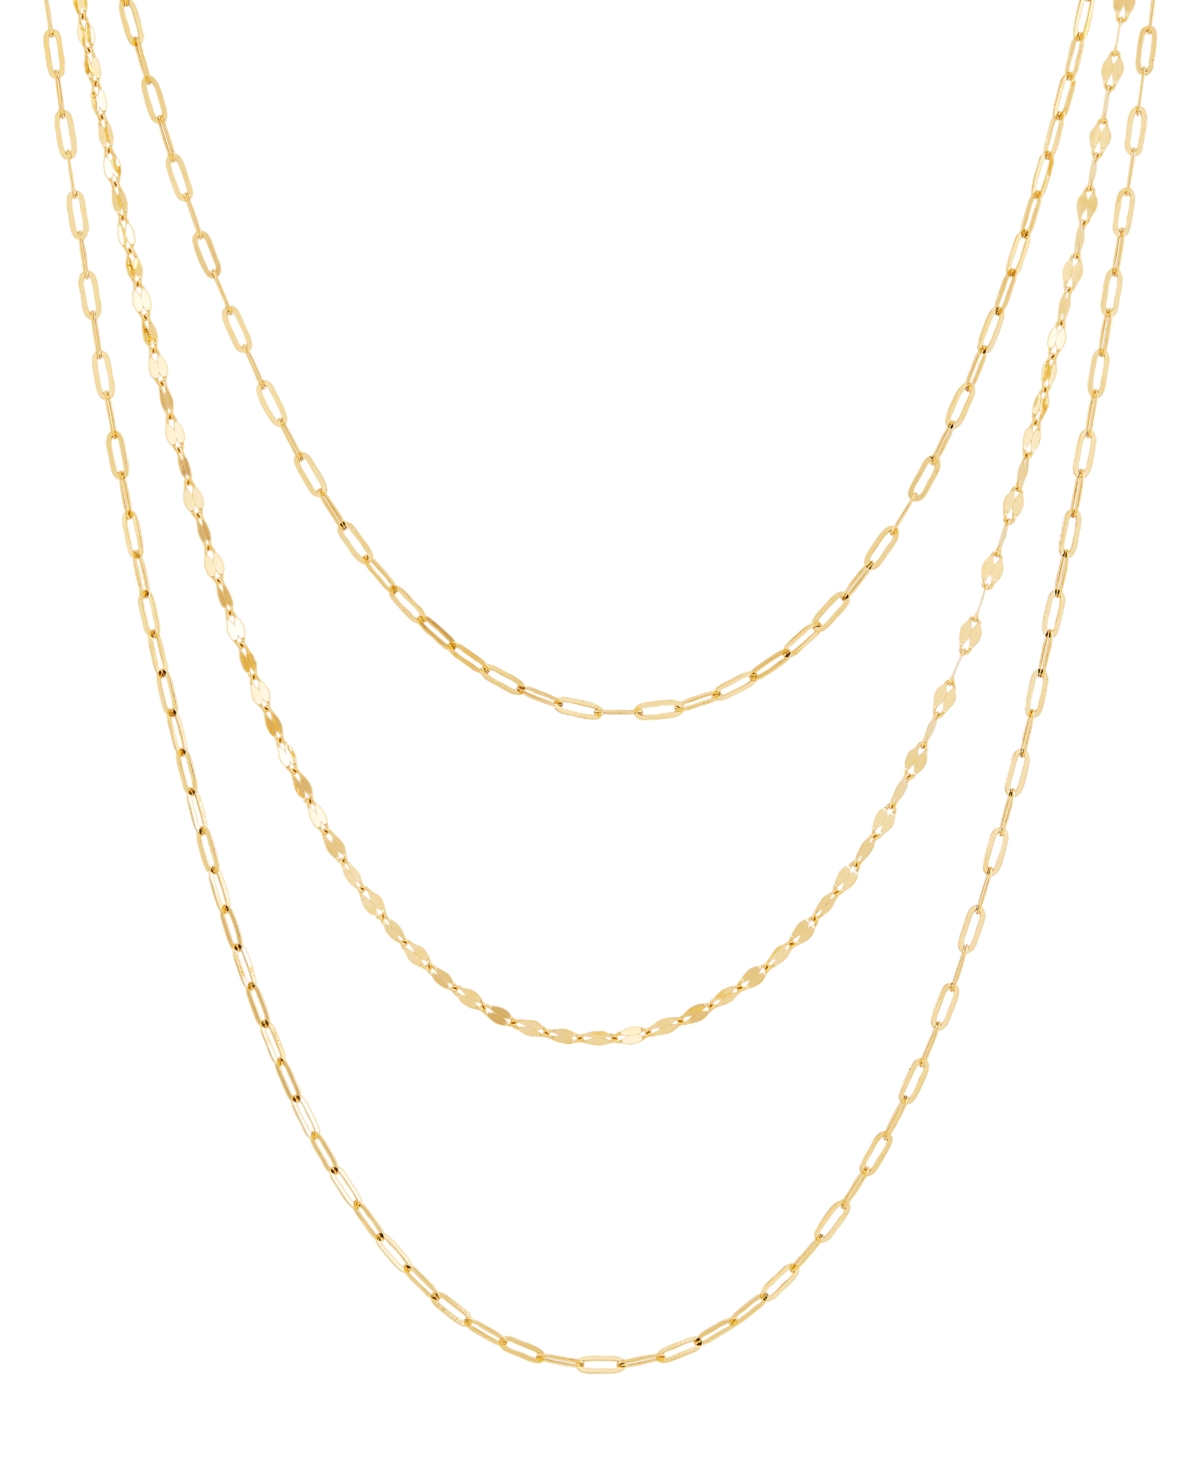 Paperclip & Mirror Link 15" Layered Necklace in 14k Gold - Yellow Gold